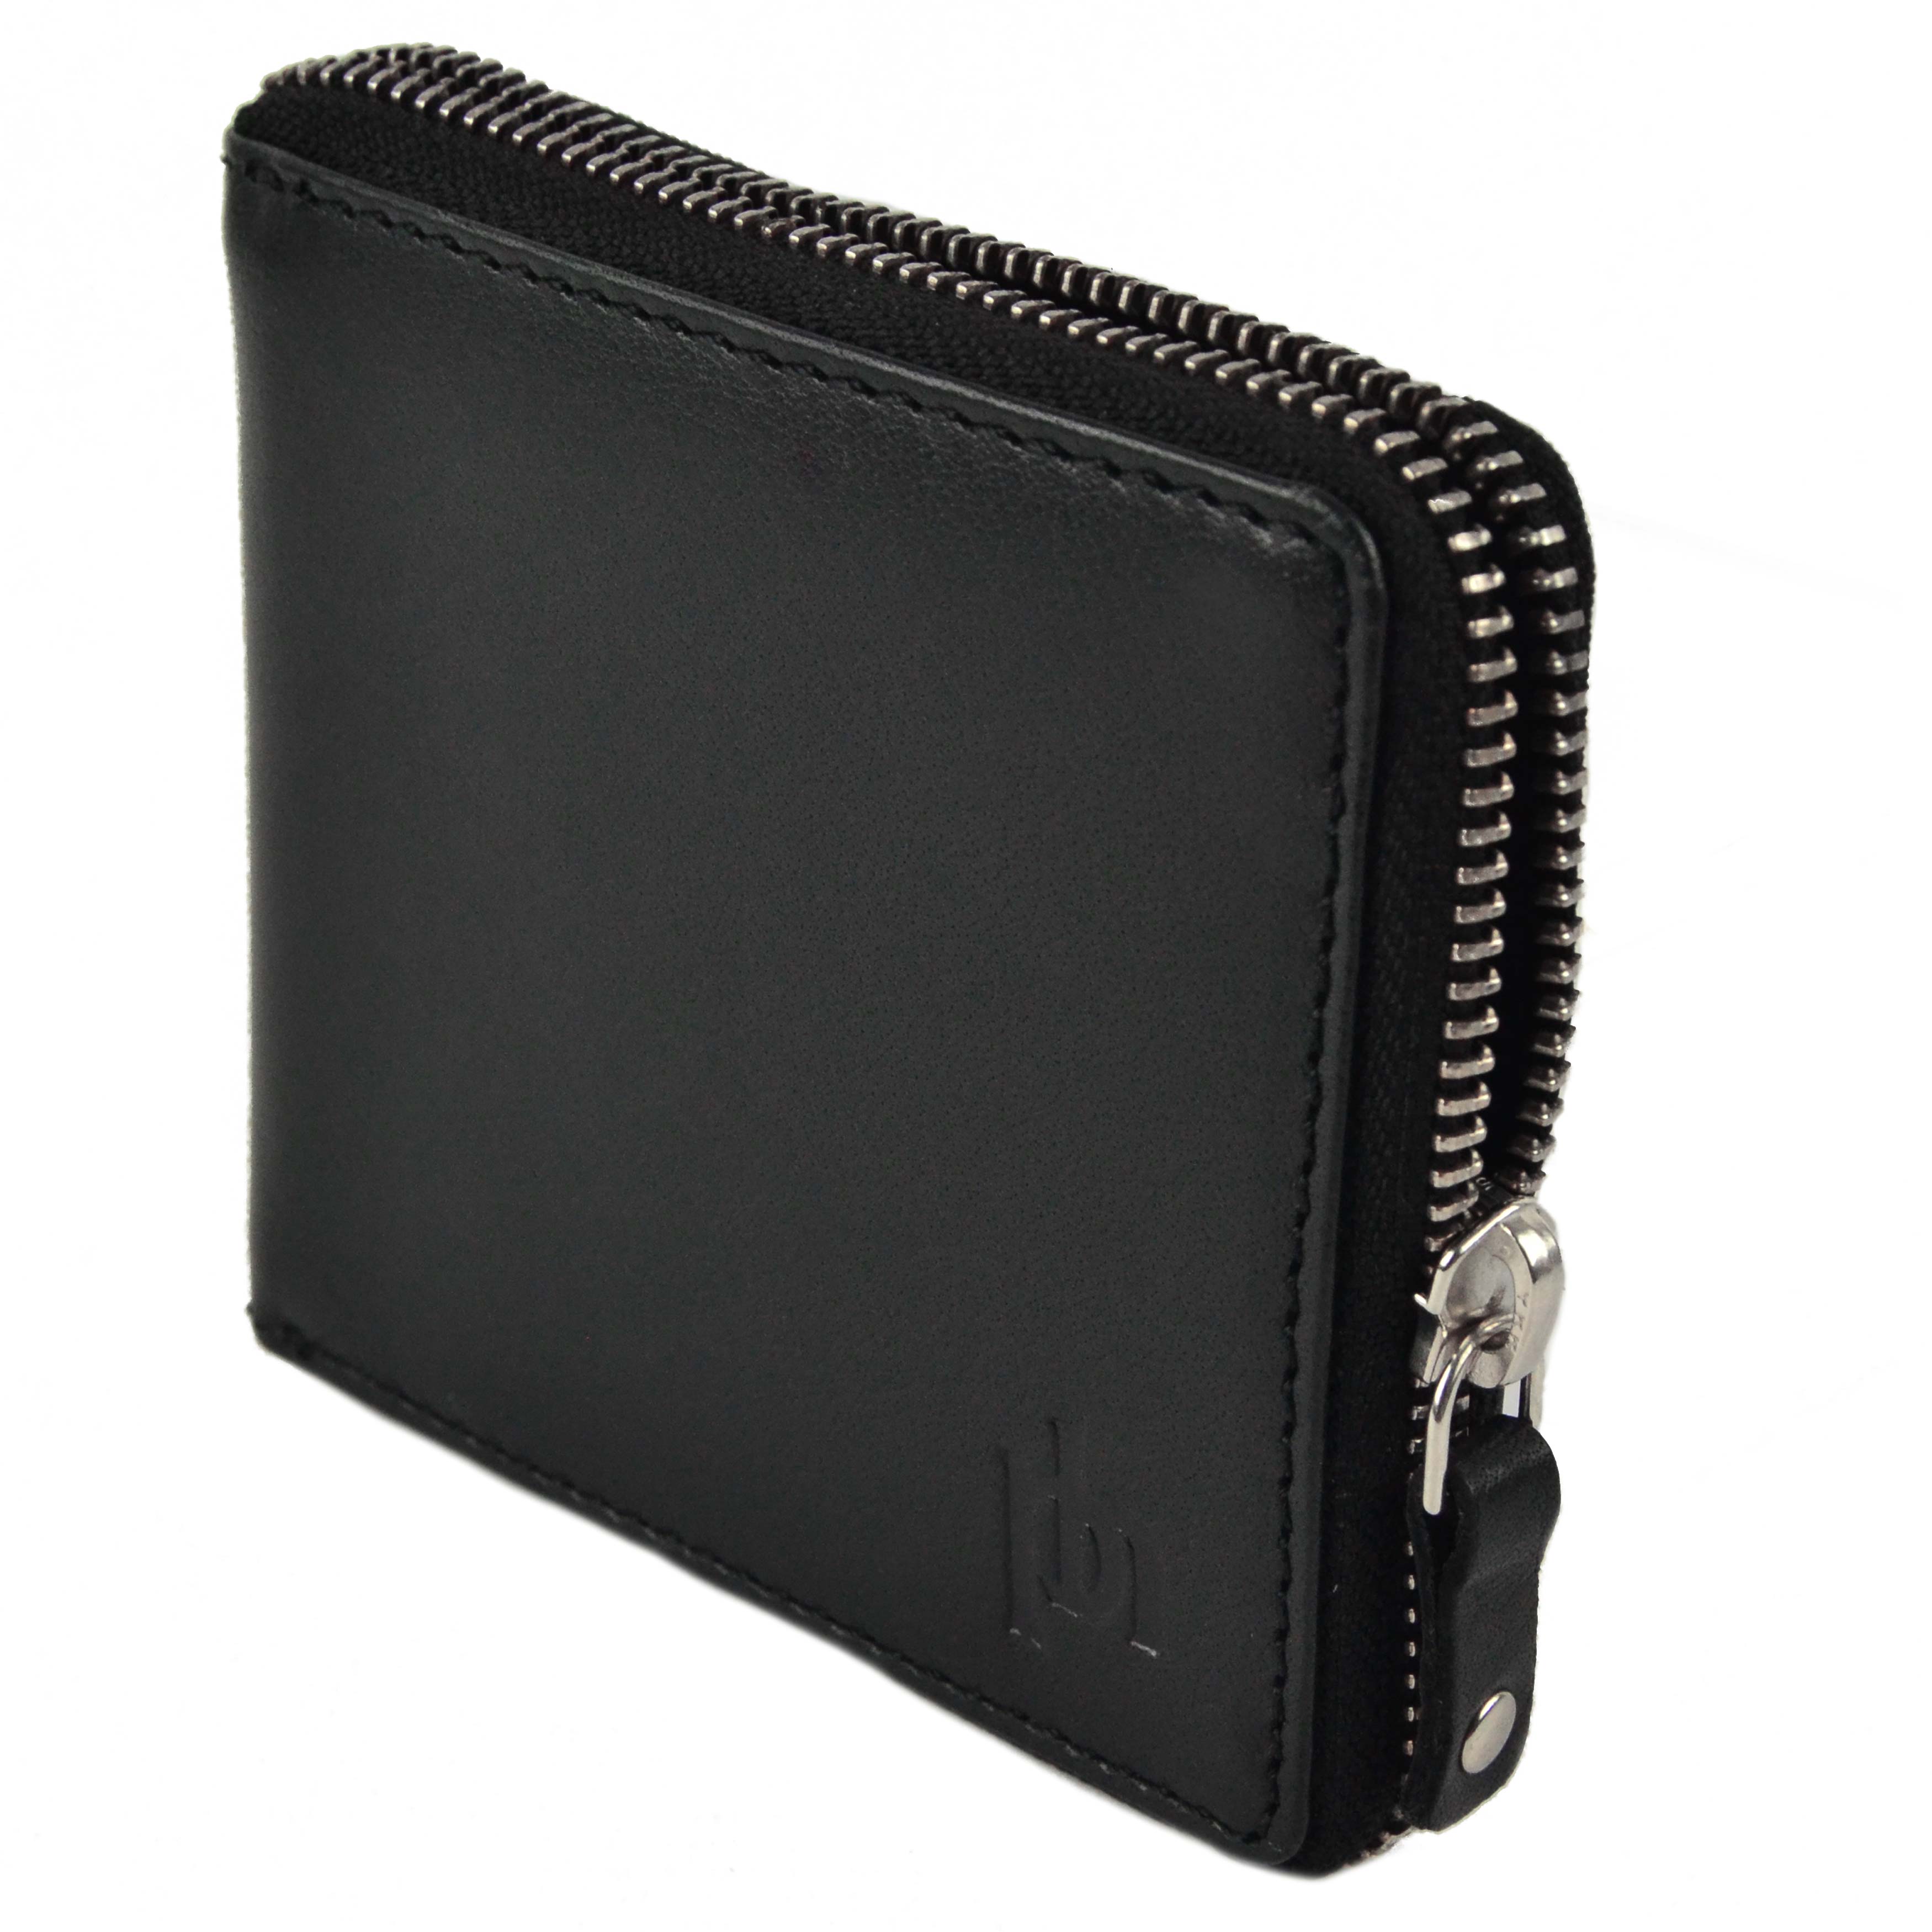 Mens Quality Soft Leather Zip-Around Wallet by PrimeHide Gift Boxed | eBay